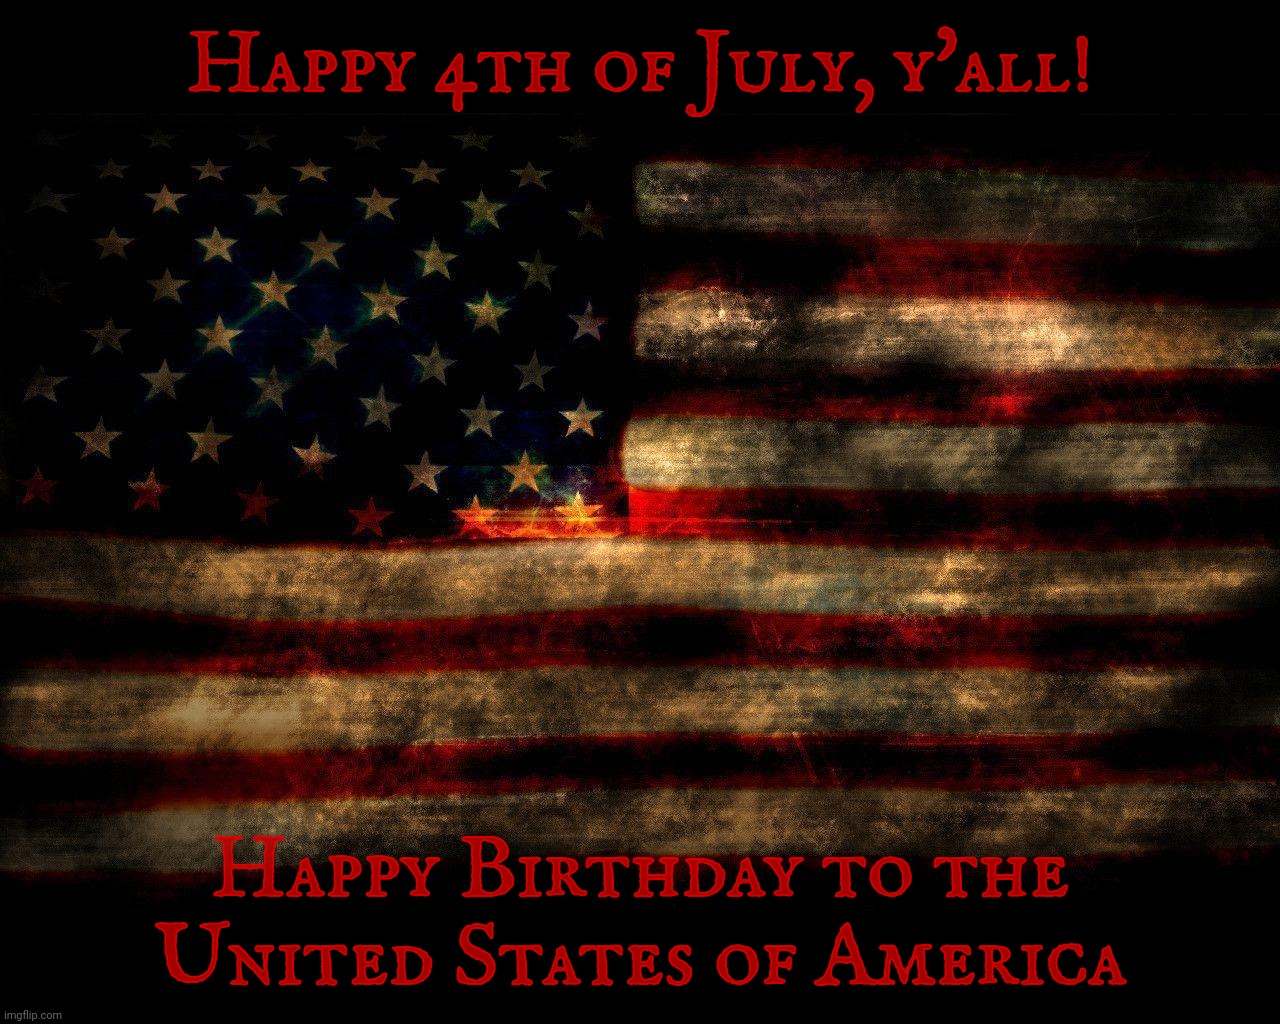 Have a happy  4th of July everybody! | Happy 4th of July, y'all! Happy Birthday to the United States of America | image tagged in usa flag lg 1280 x 1024,4th of july,fourth of july,independence day,happy birthday usa,the united states of america | made w/ Imgflip meme maker